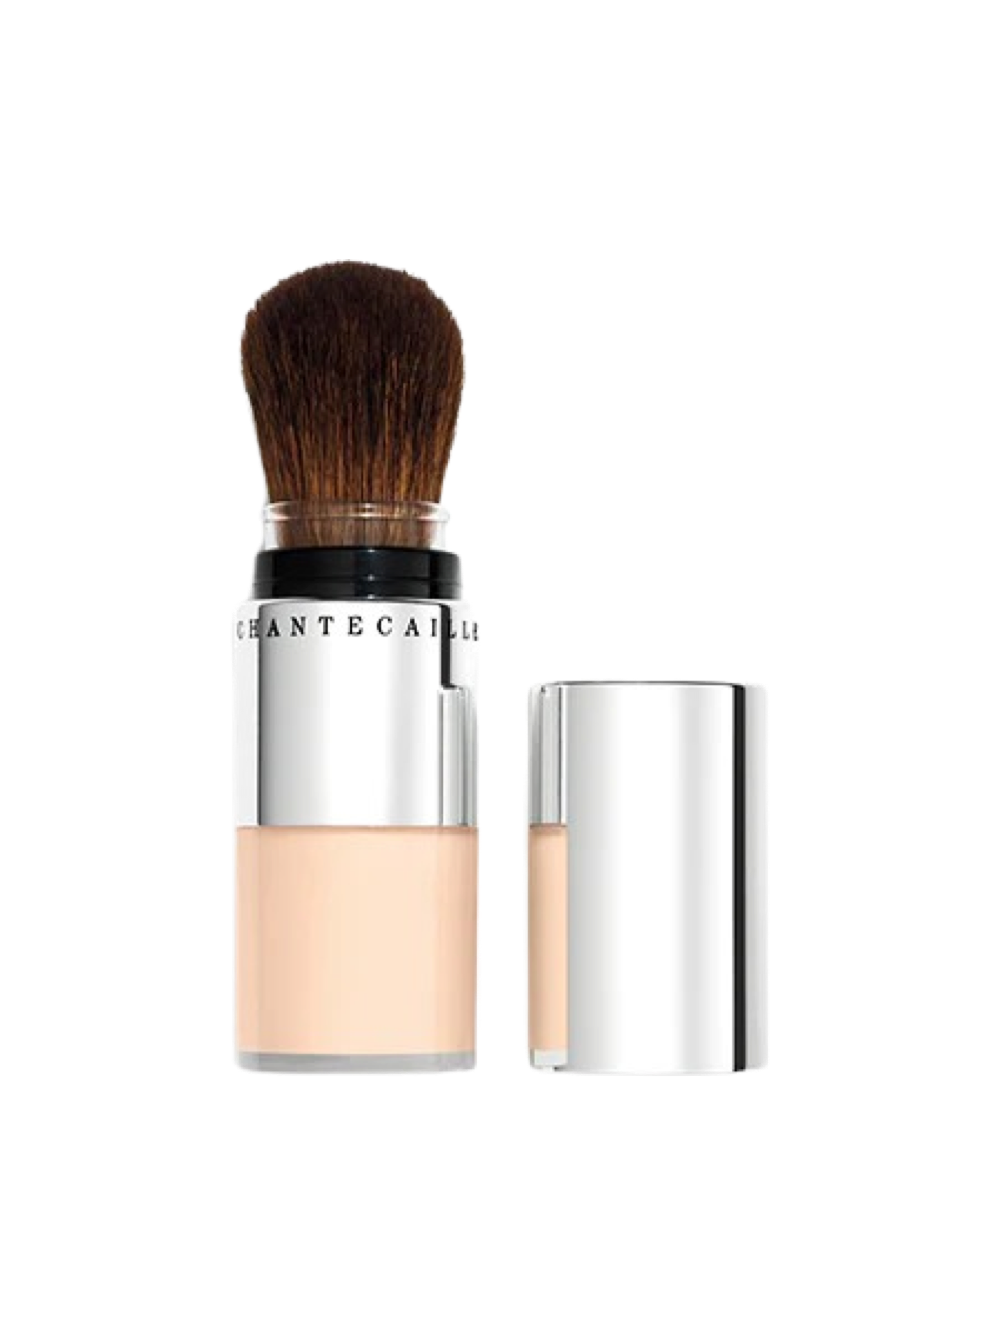 Chantecaille HD Perfecting Loose Powder - Candlelight